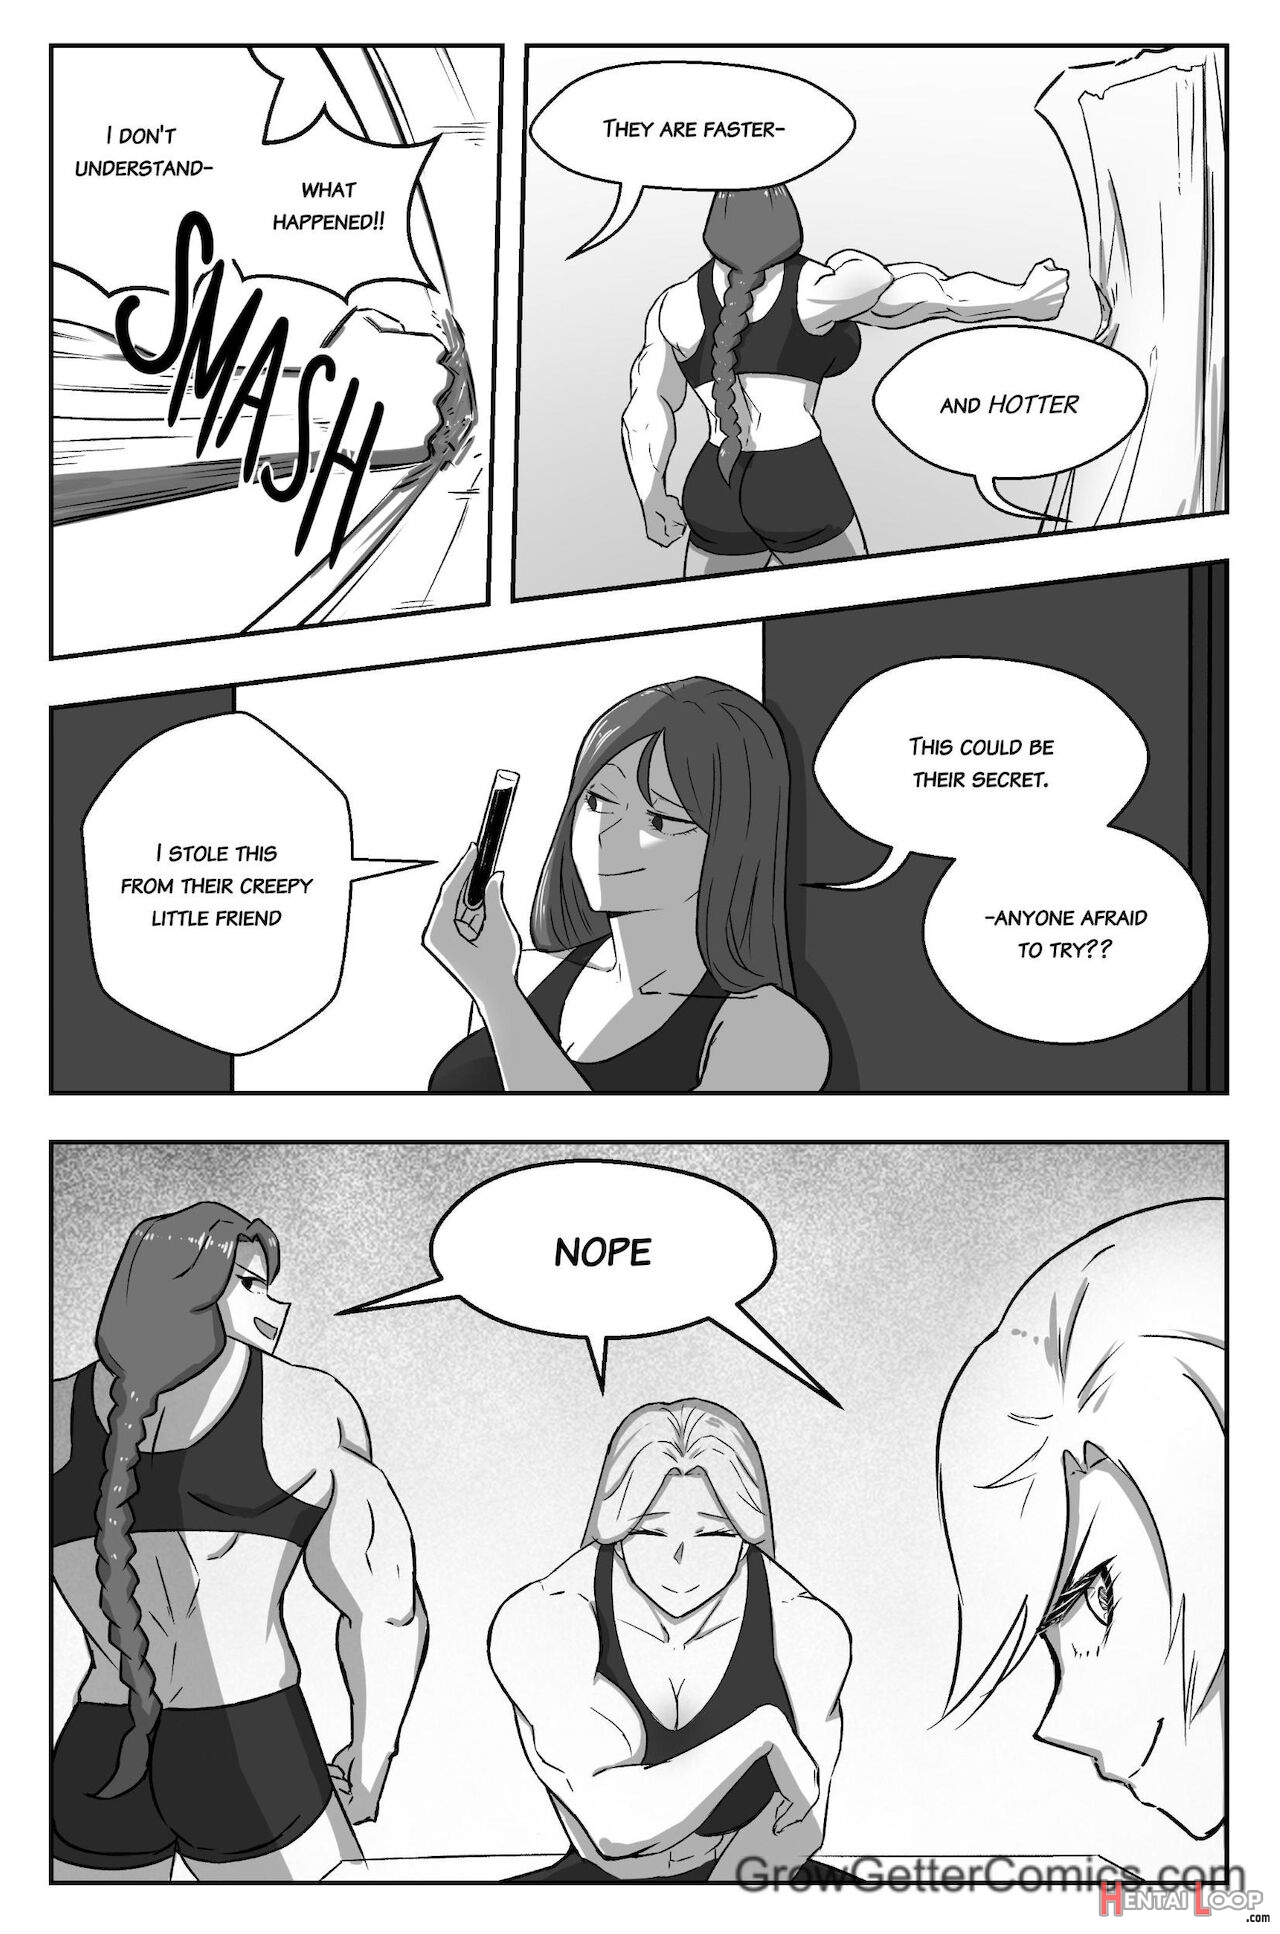 Growgetter -from Worst To First 1-2 page 17